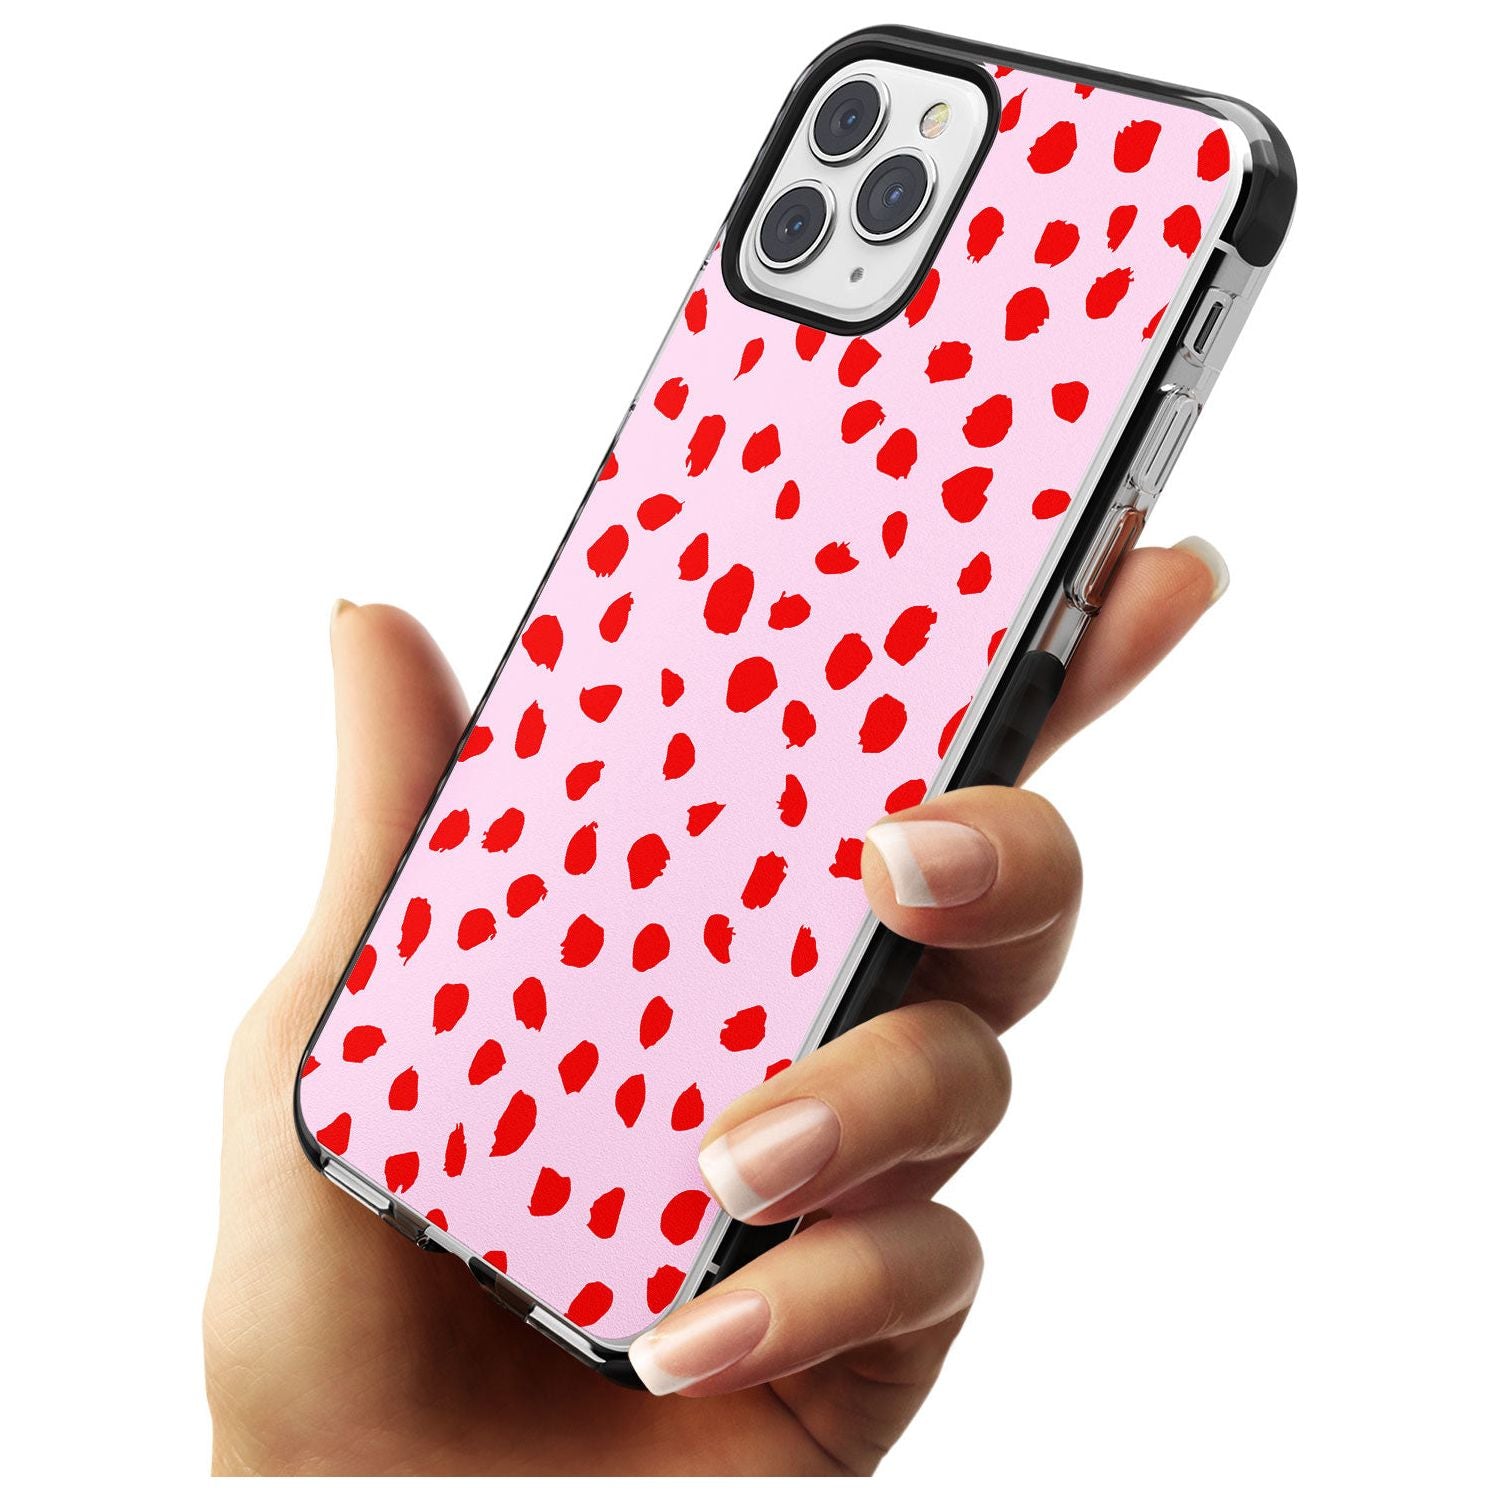 Red on Pink Dalmatian Polka Dot Spots Black Impact Phone Case for iPhone 11 Pro Max